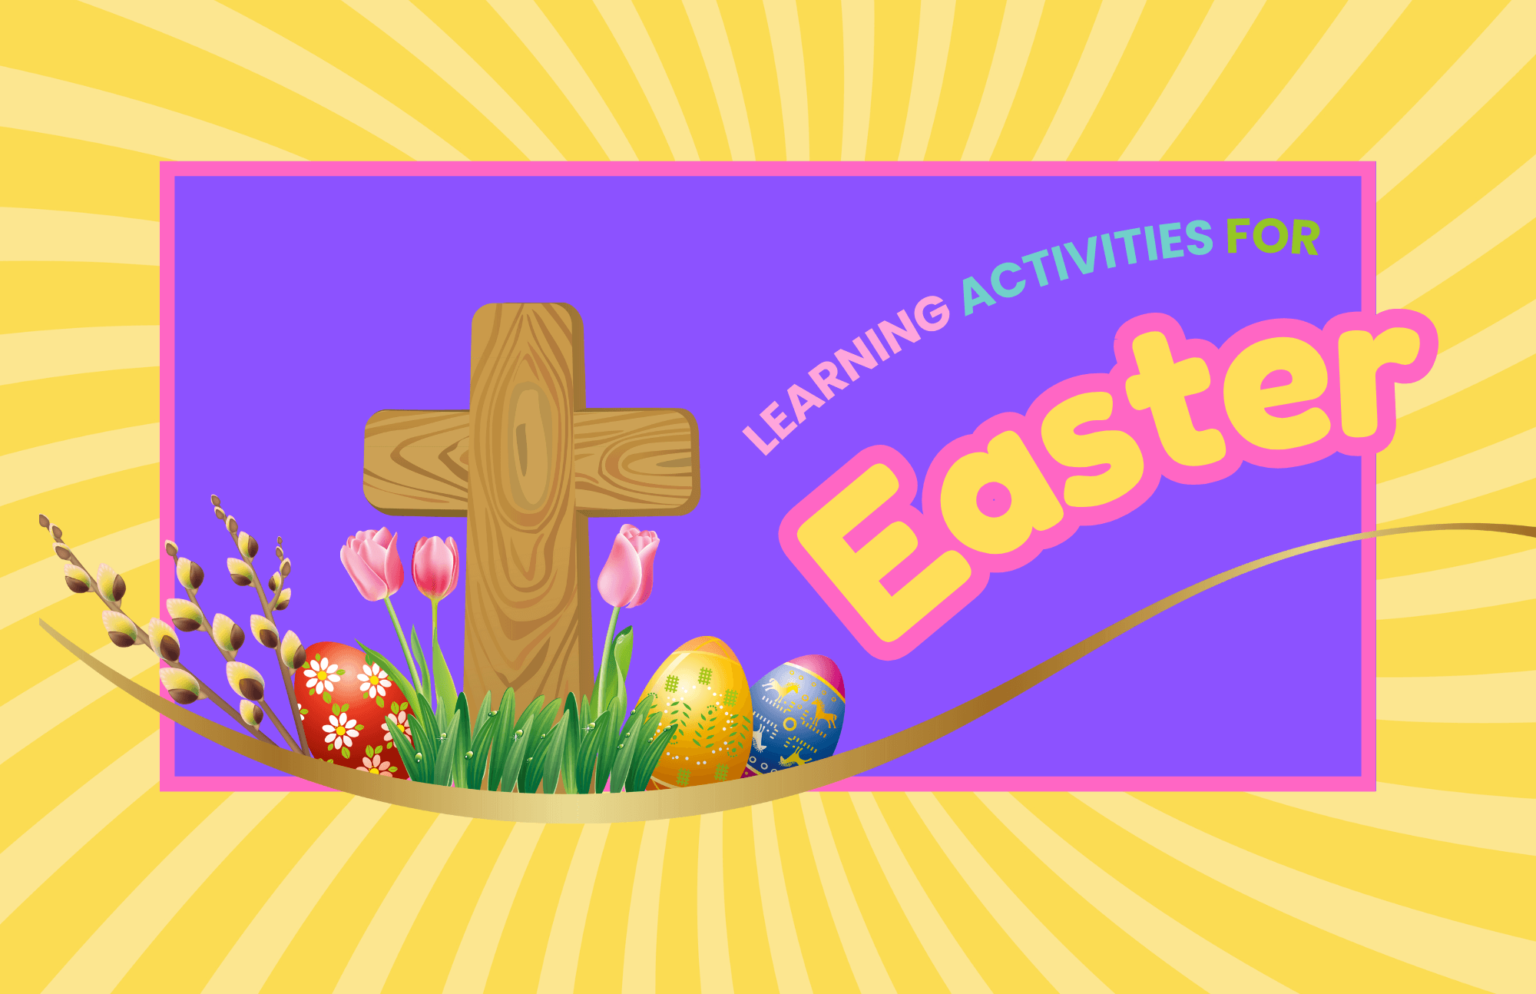 This blog article has a list of fun learning activities for Easter.